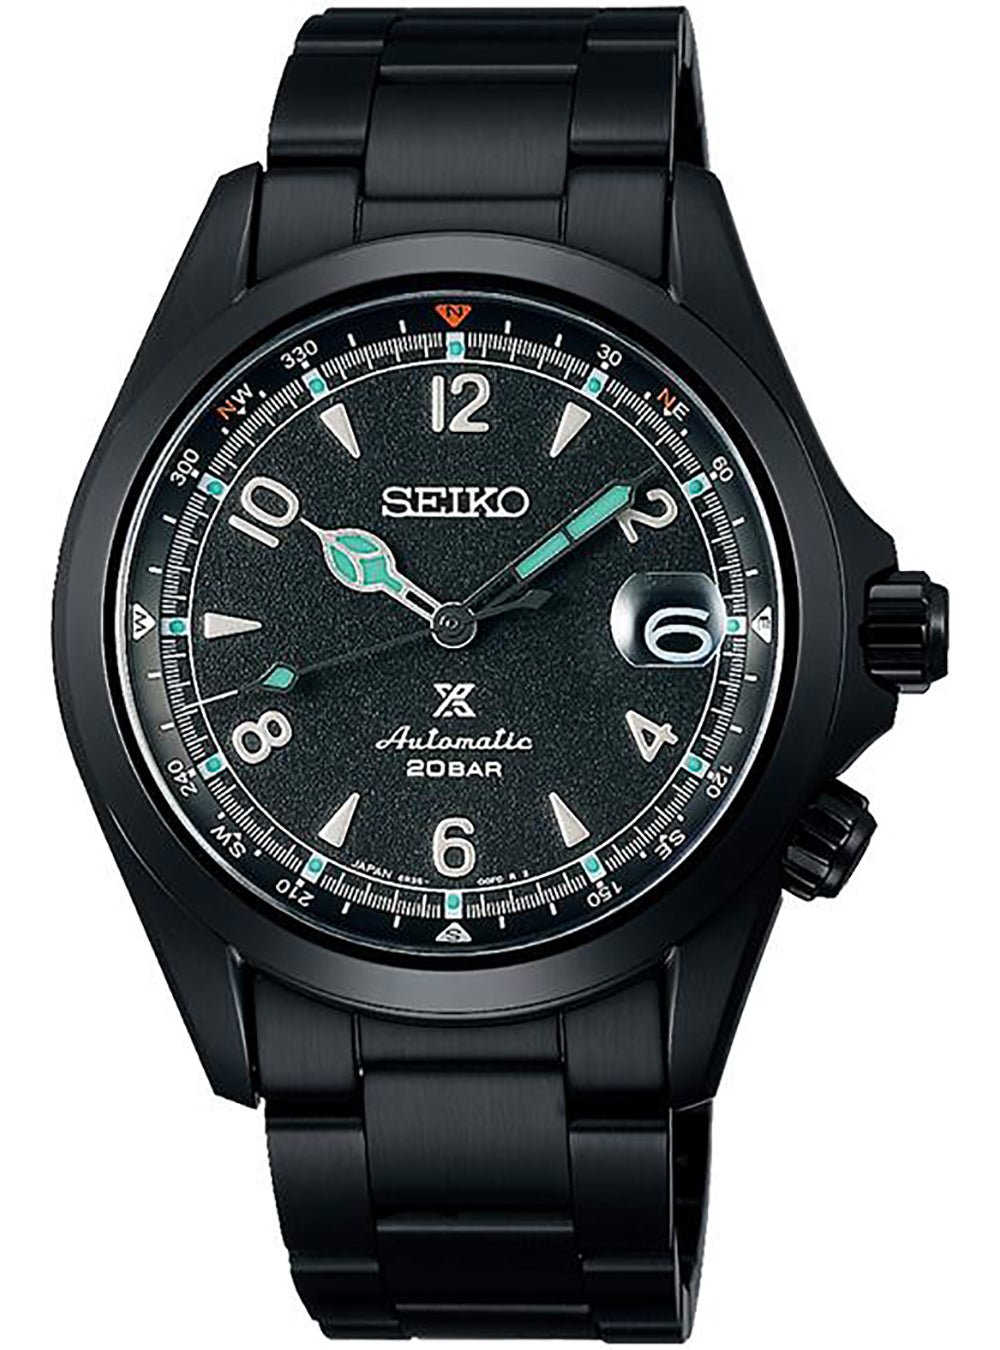 Seiko Prospex Alpinist Review: A Field Watch Unlike Any Other